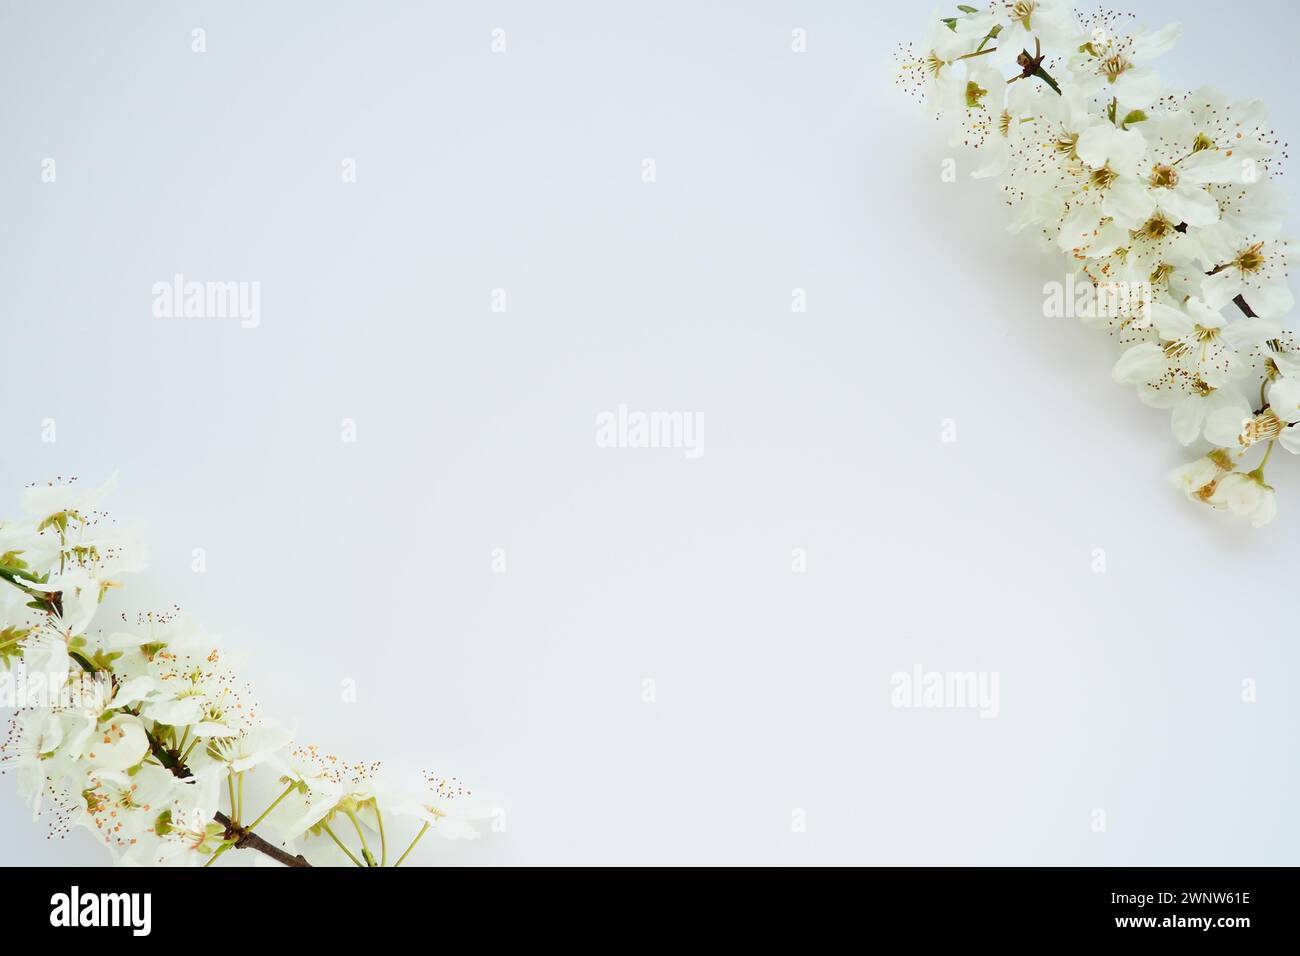 Bird cherry, cherry or sweet cherry flowers on a white background. Copy space for text. Spring flowers on a plain white sheet of paper. Two branches Stock Photo